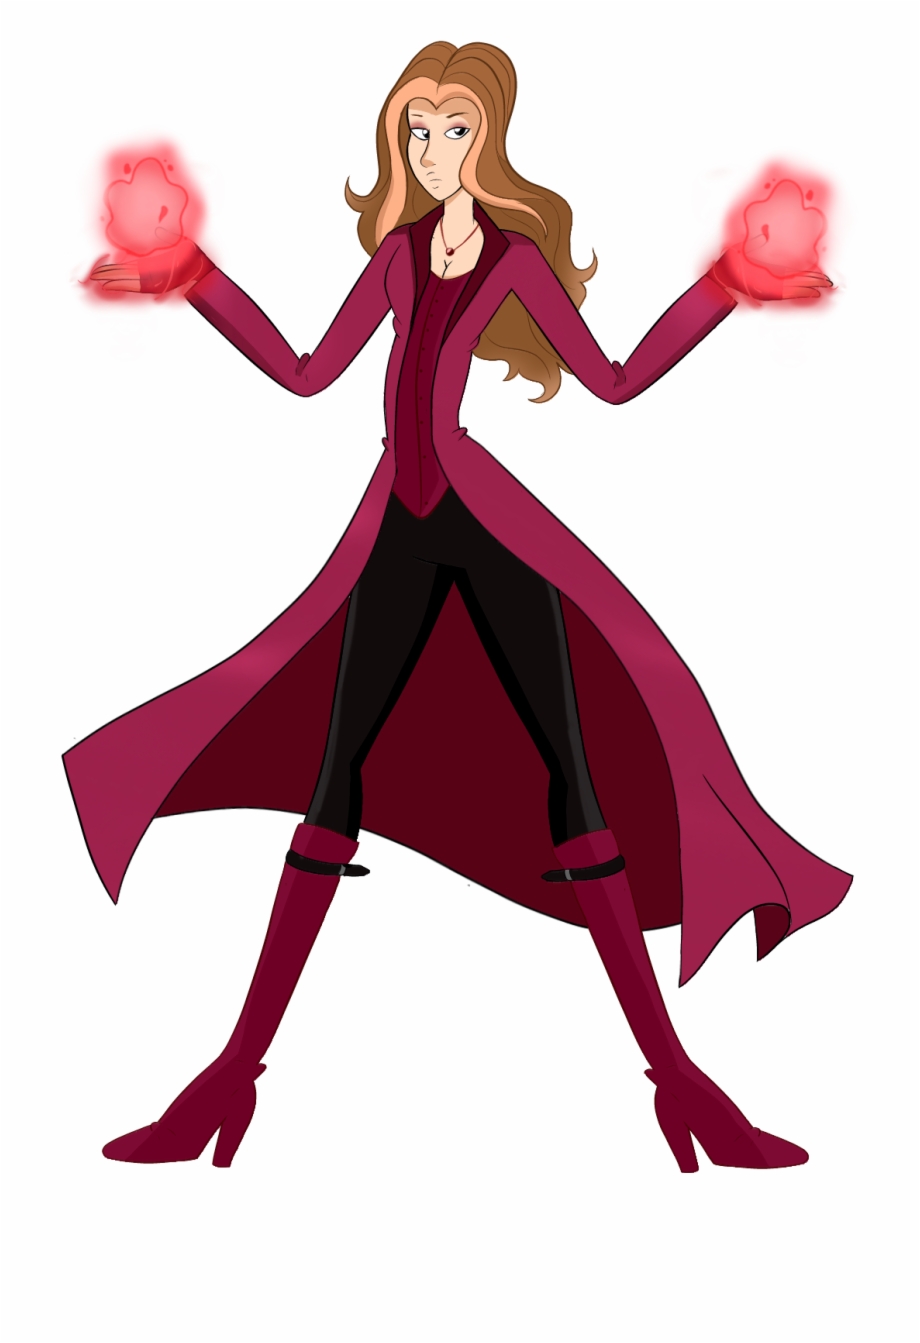 The scarlet witch.